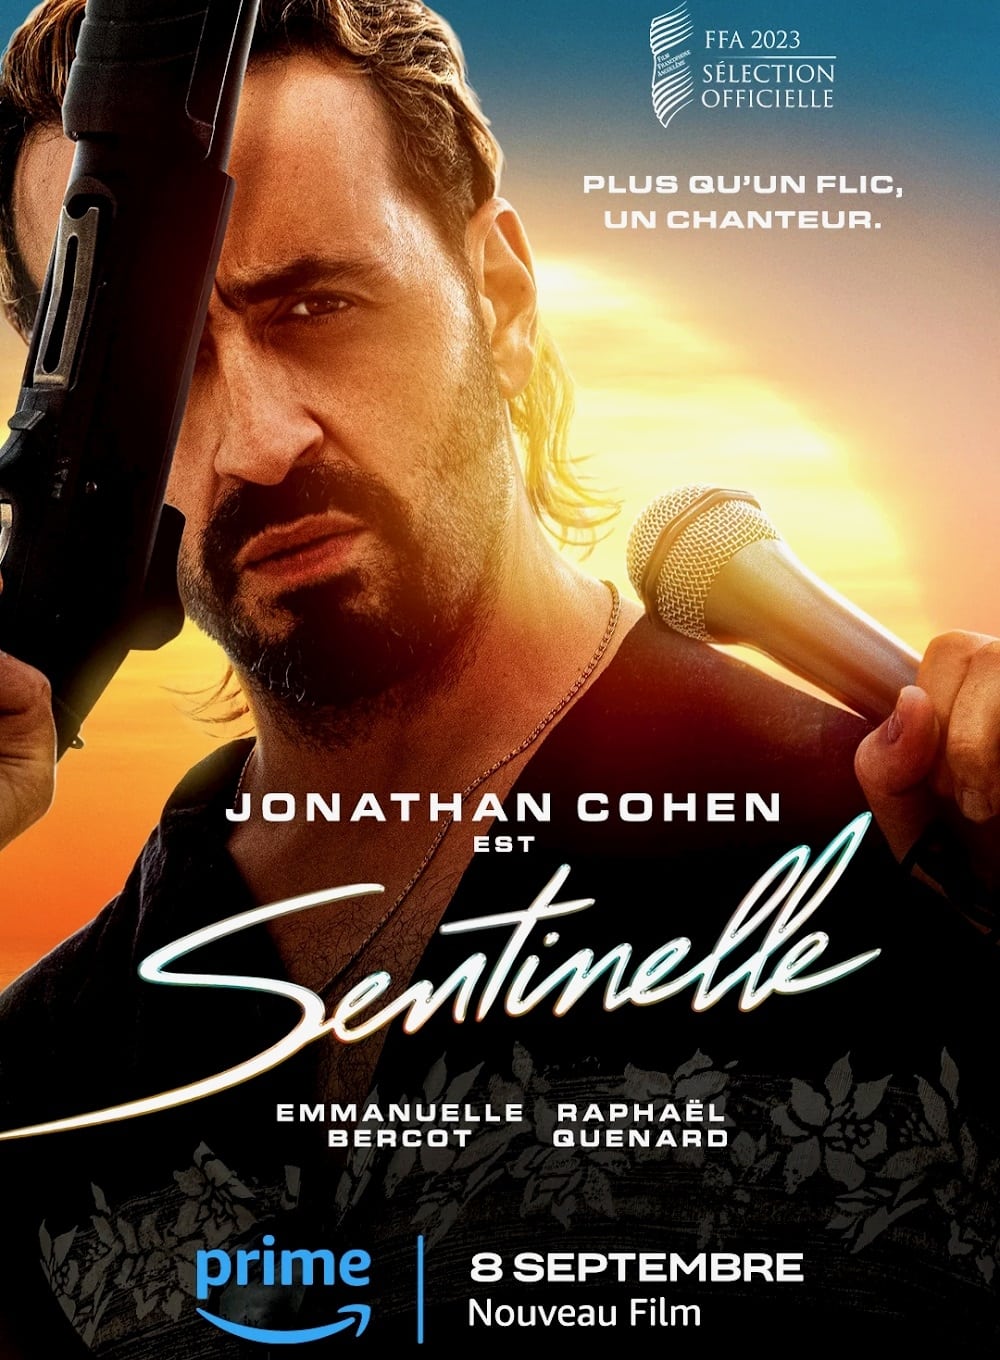 François Sentinelle has two lives. By day, he is the most famous cop of Réunion Island, known for his tough methods and flowery shirts, pursuing criminals in his famous yellow defender. But the rest of the time, Sentinelle is also a charming singer.